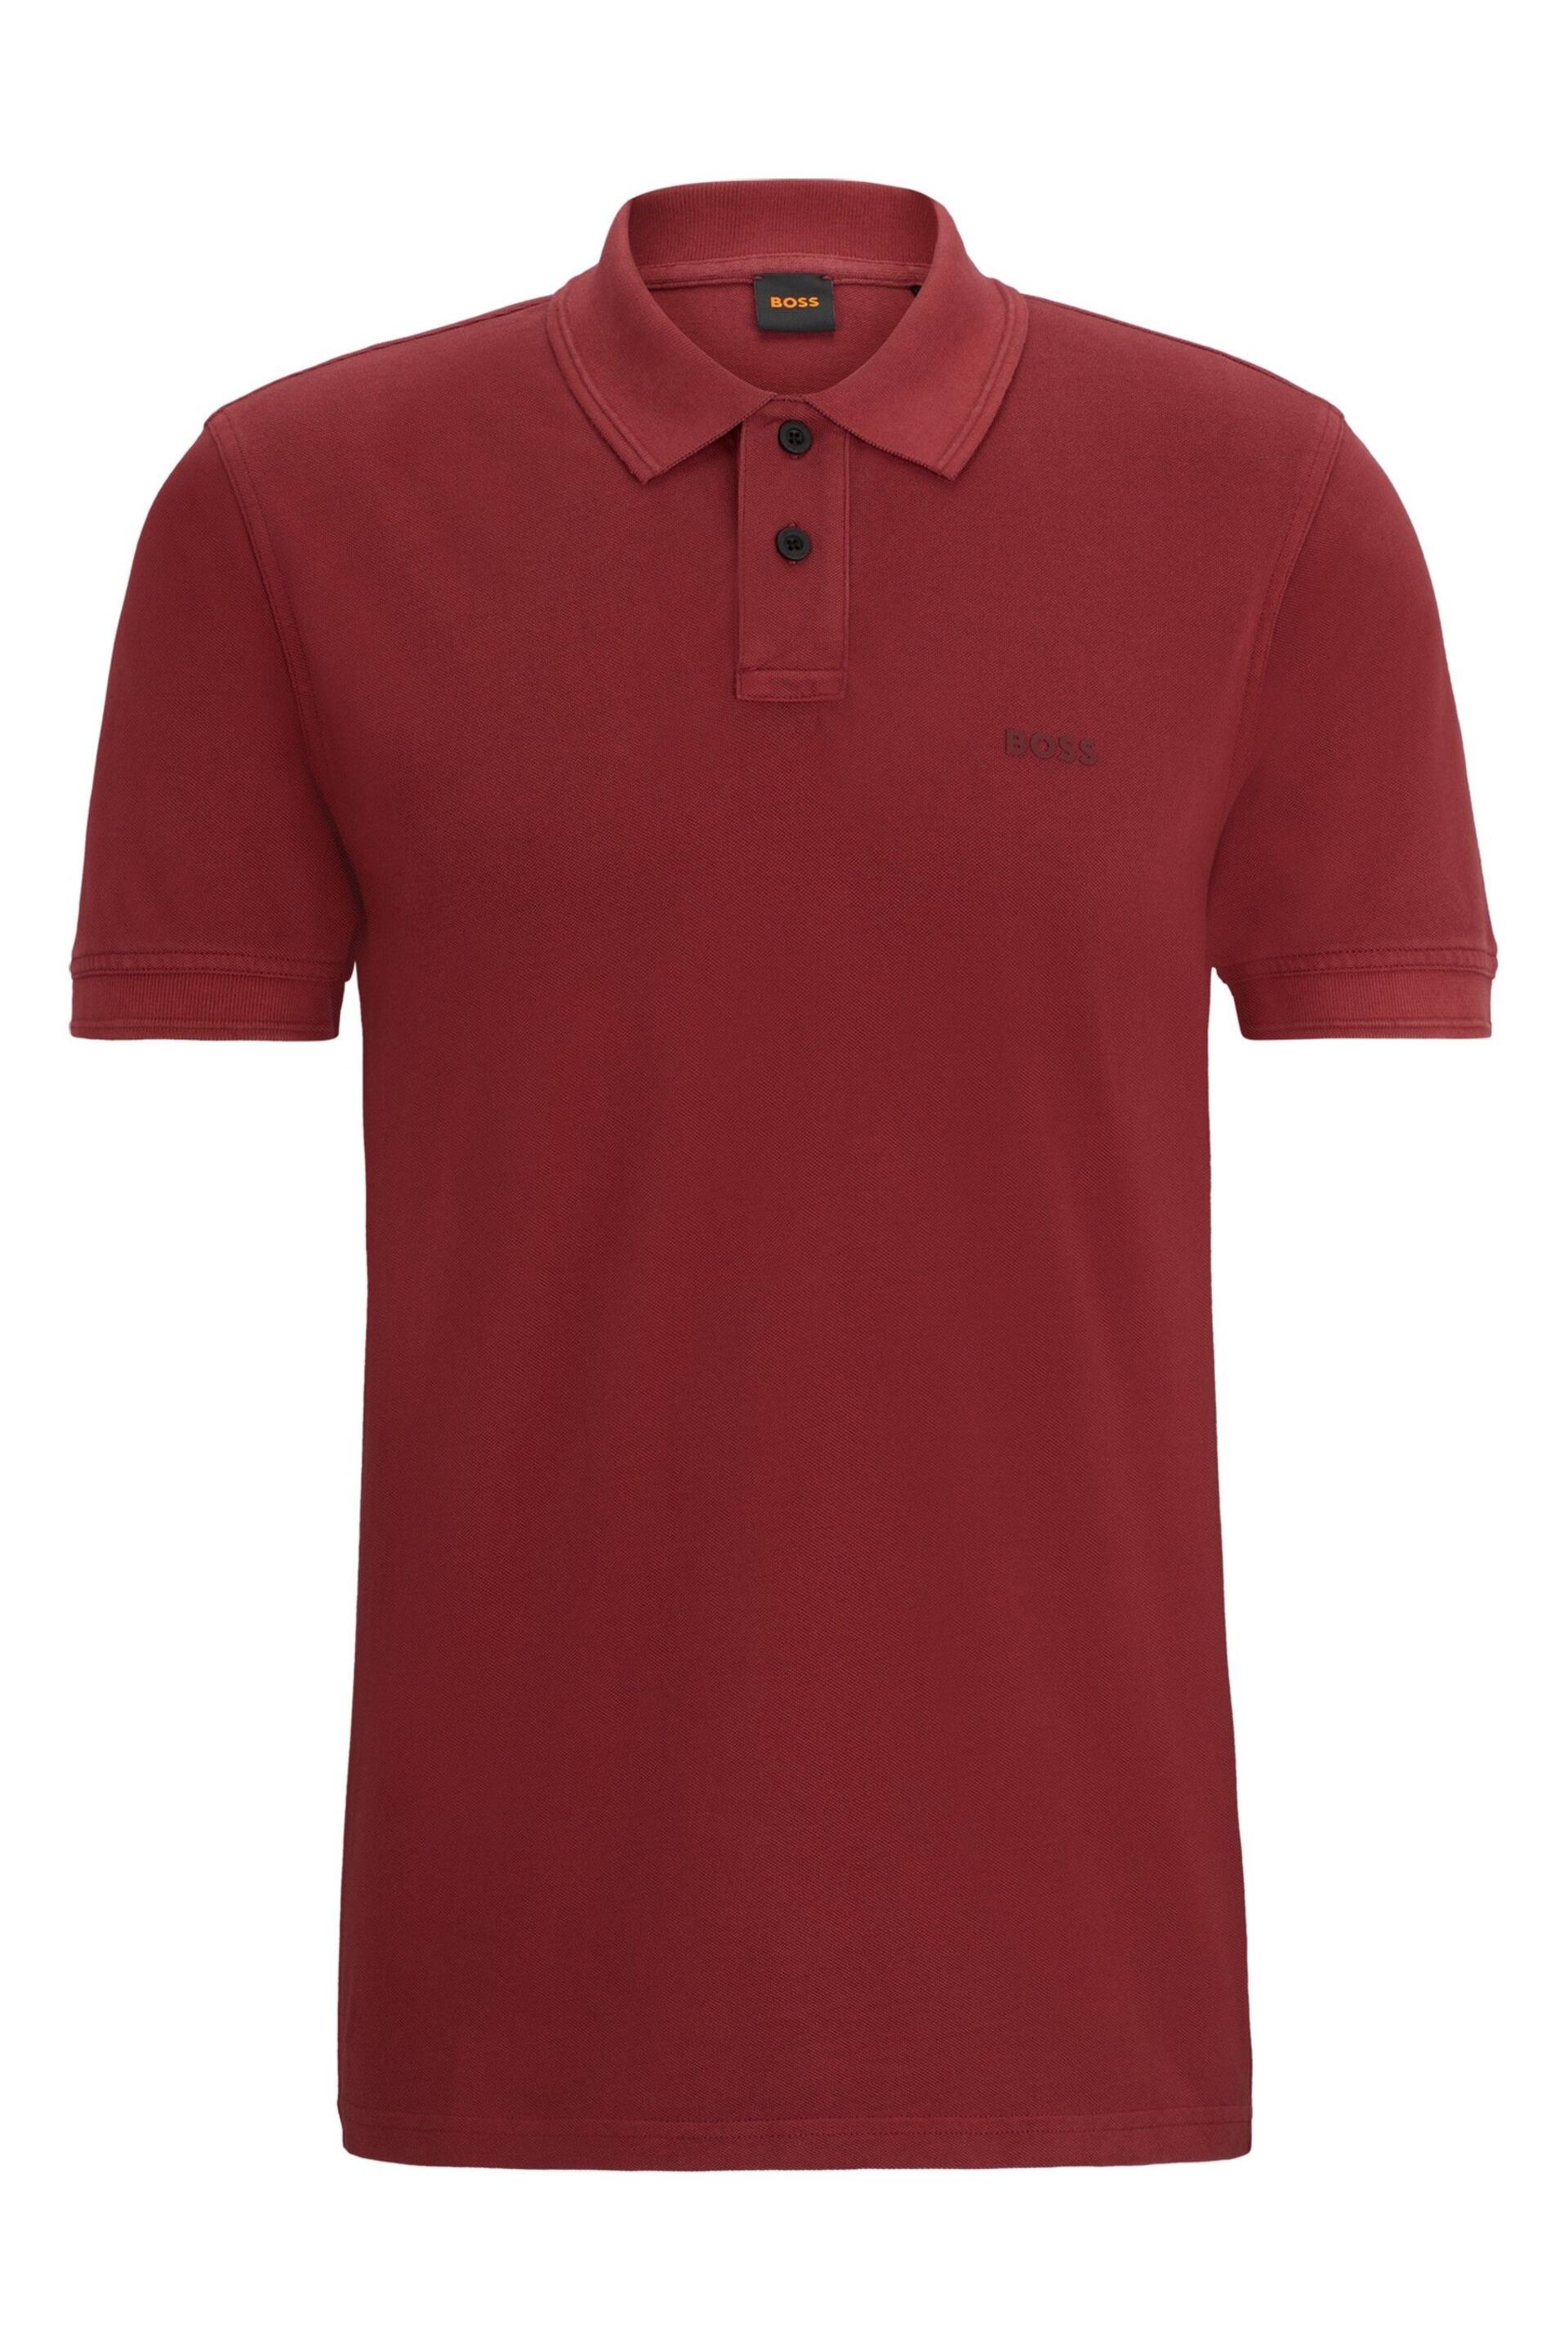 BOSS Red Cotton Pique Polo Shirt - Image 5 of 5